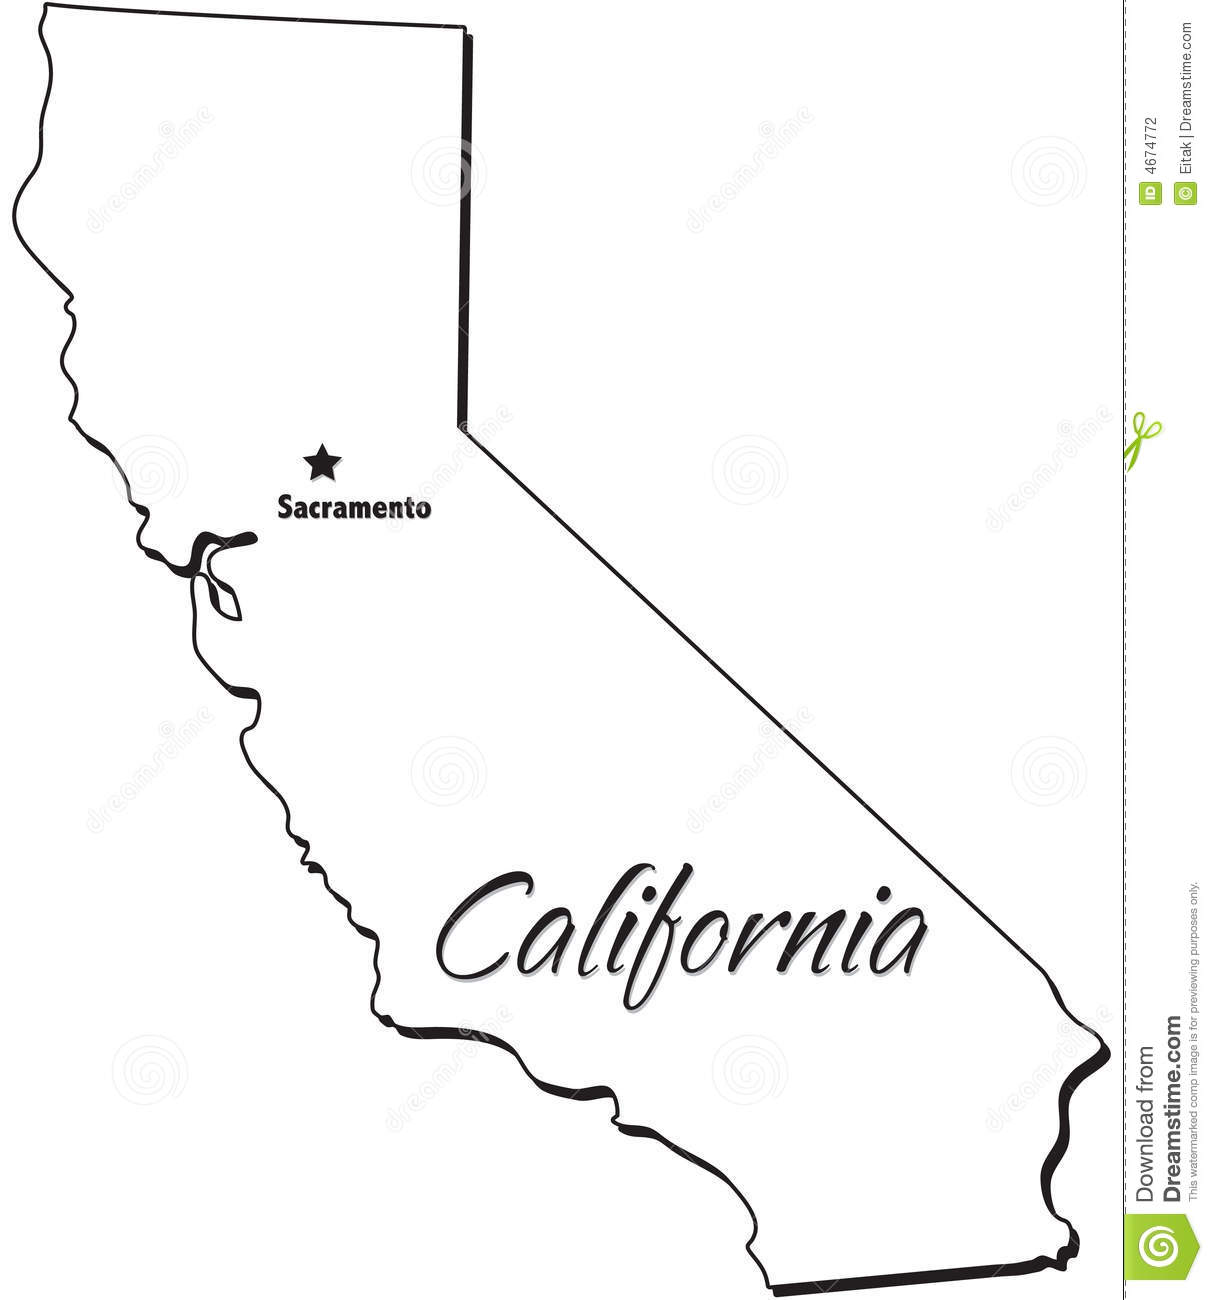 State Of California Outline Stock Photography   Image  4674772